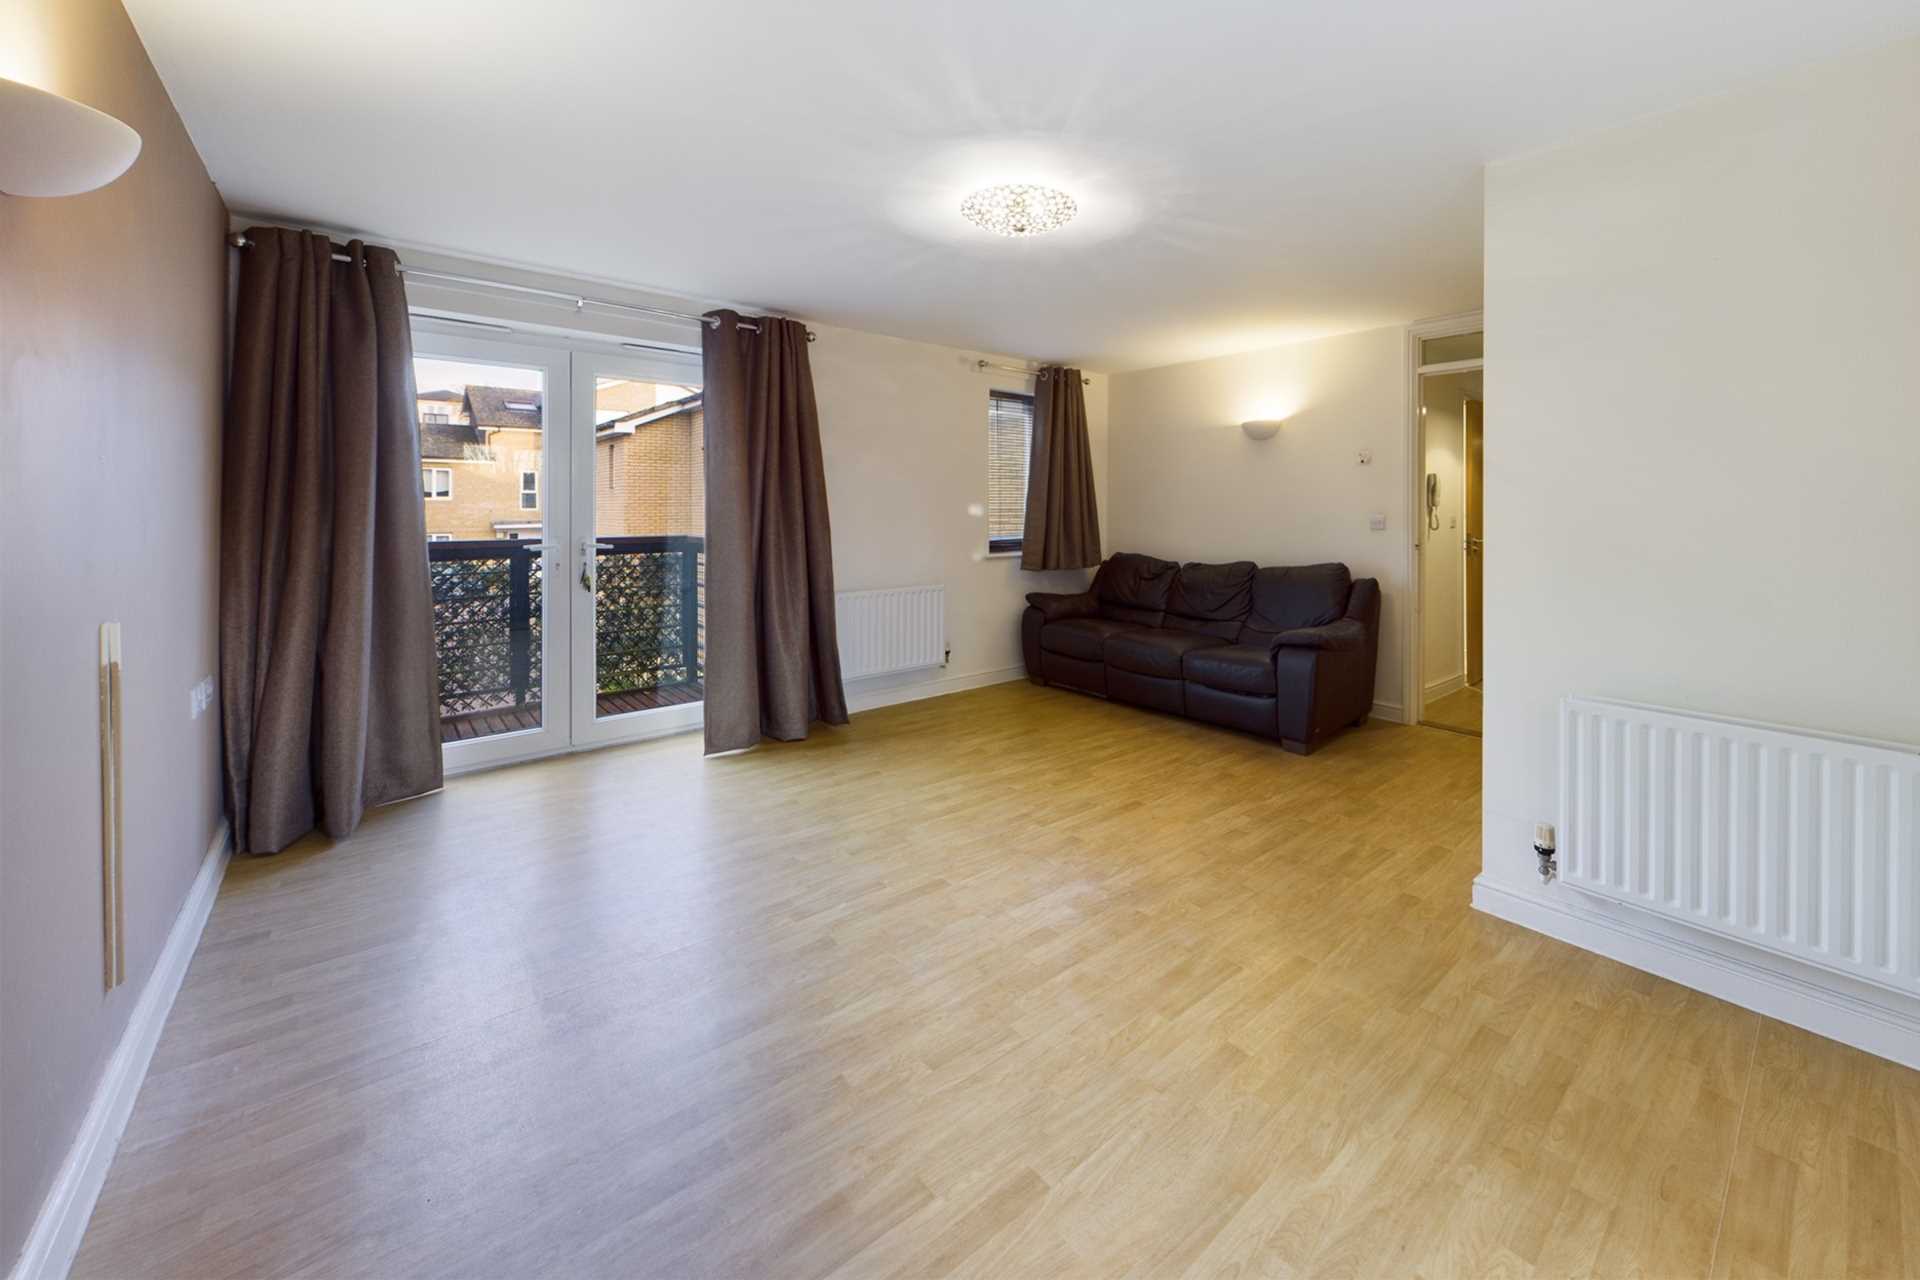 Harkness Road, Hemel Hempstead, Unfurnished, Available Now, Image 1